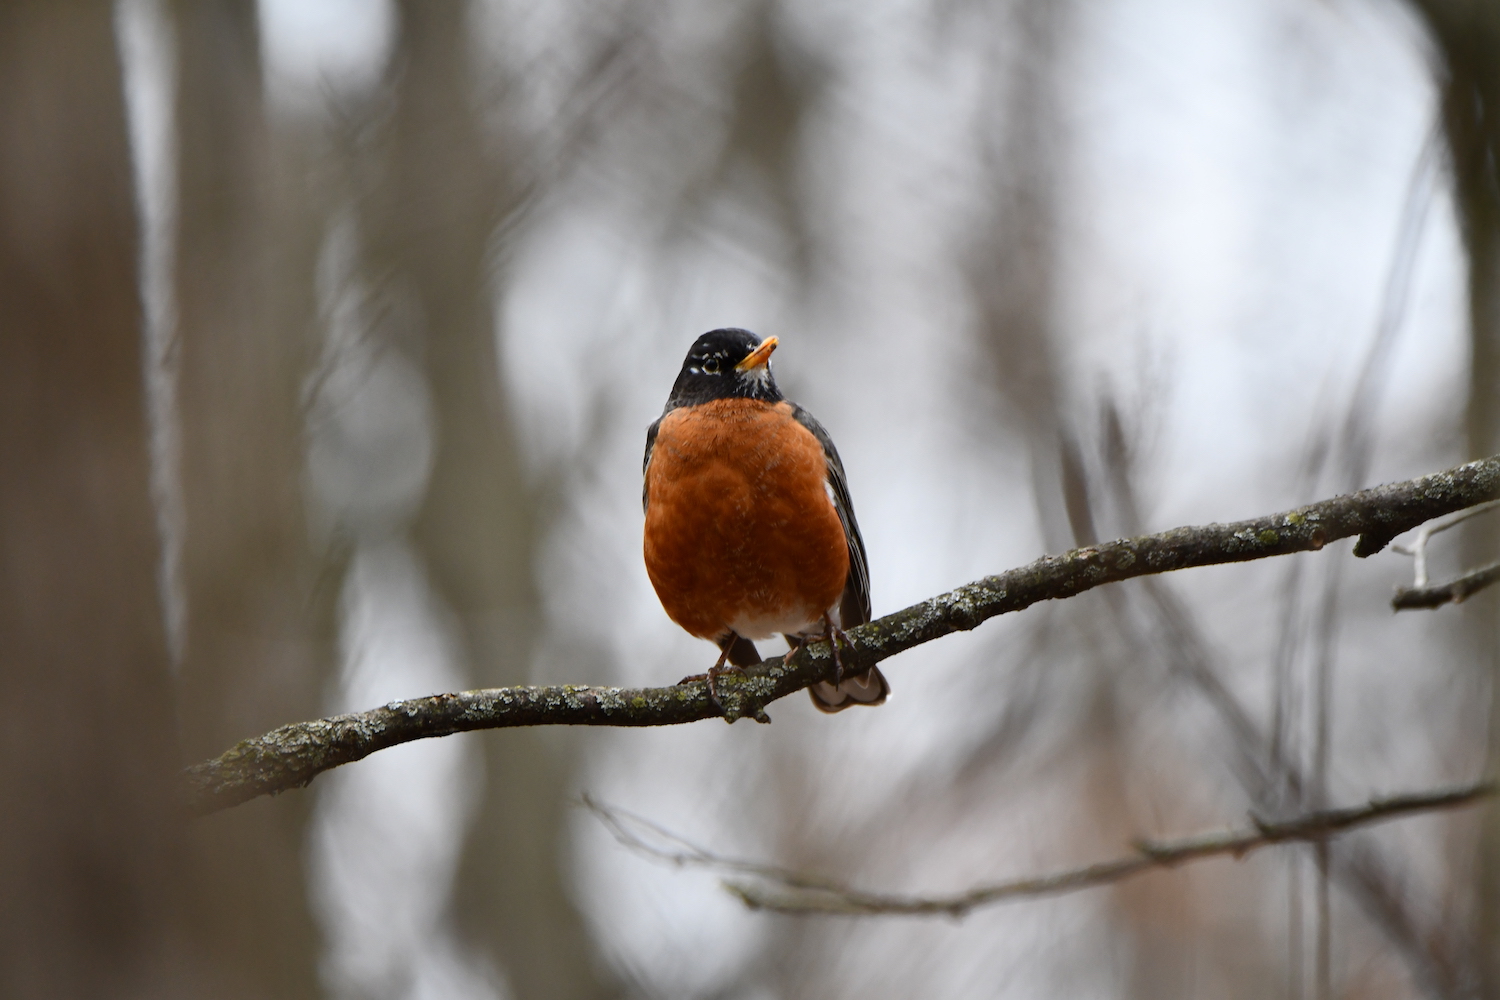 A robin perched on a bare tree branch.